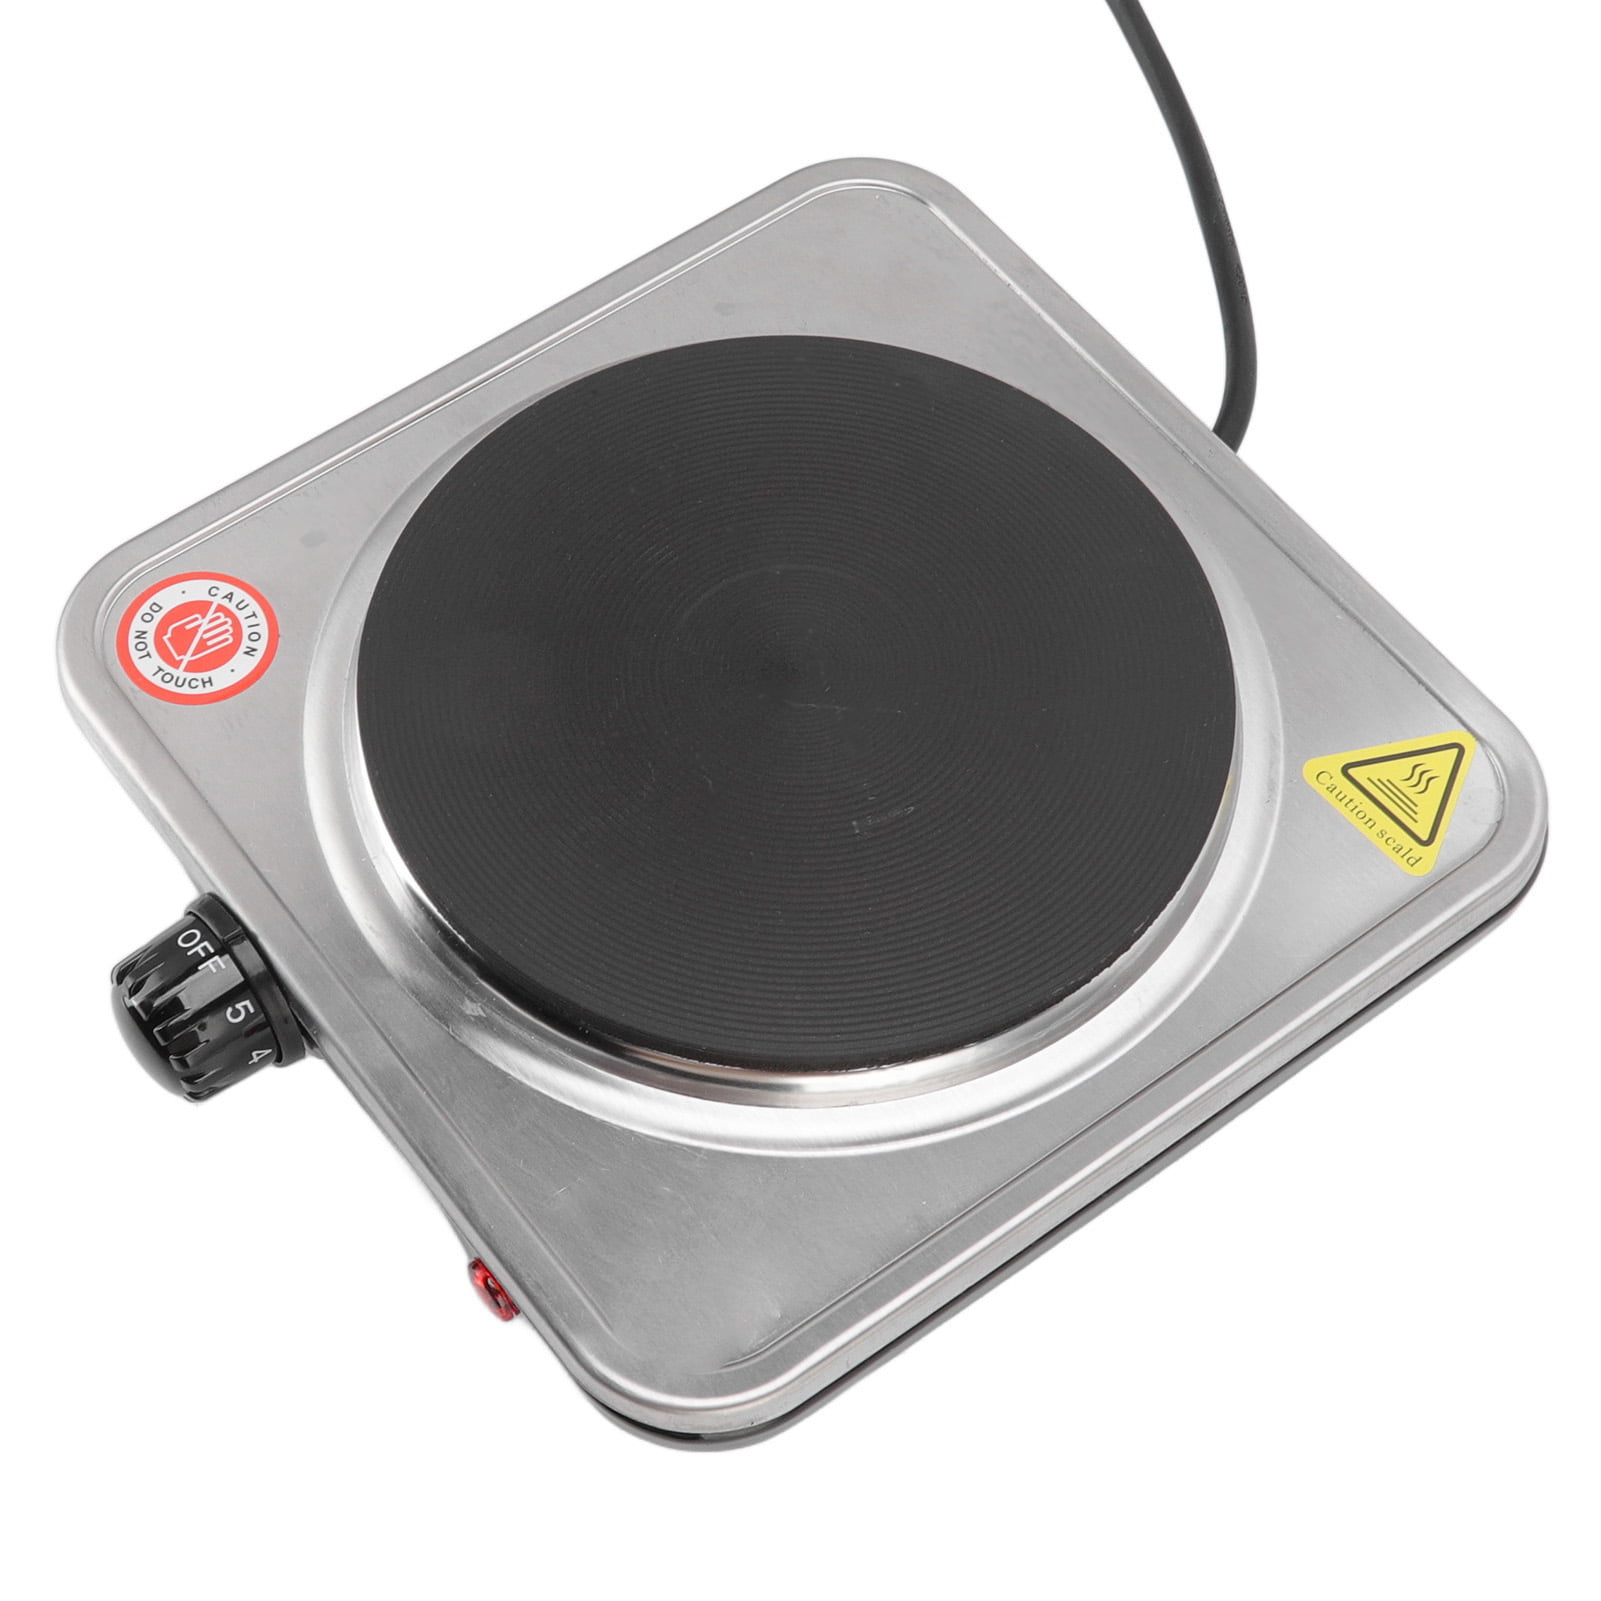 Rosarivae Lightweight Portable 1000W Single Burner Multi-functional 0-5  Settings Electric Stove with US Plug (White) 